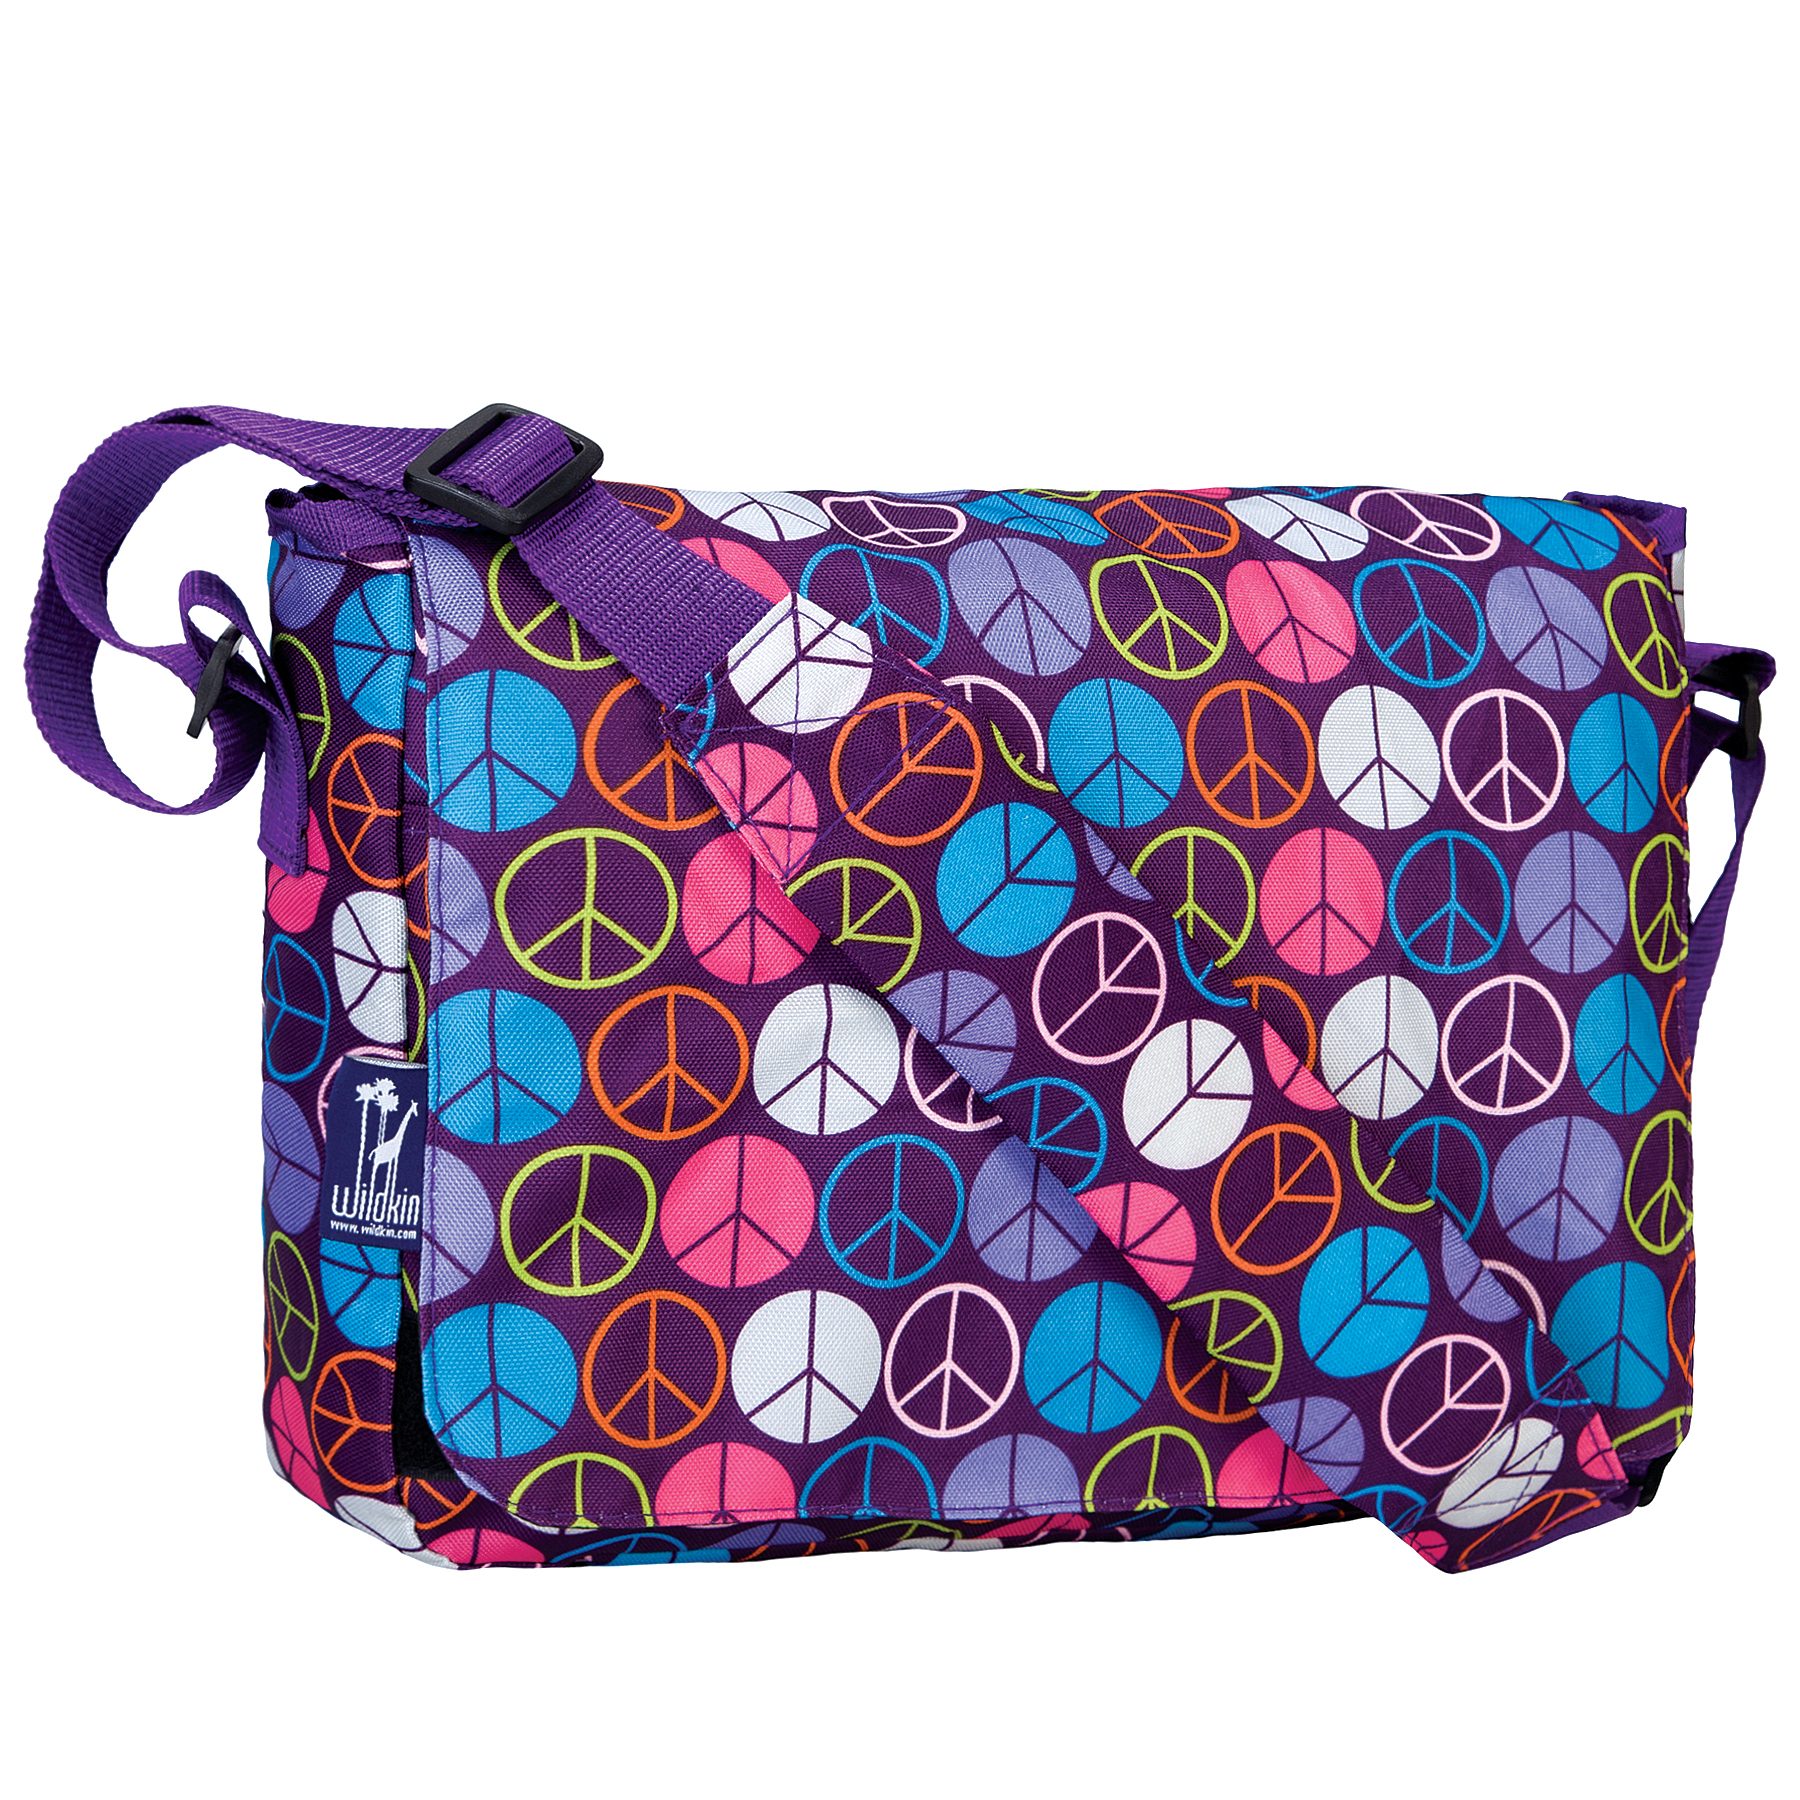 Wildkin Kids Messenger Bag for Girls, Perfect for School or Travel, 13 Inch (Peace Signs Purple) - image 1 of 7